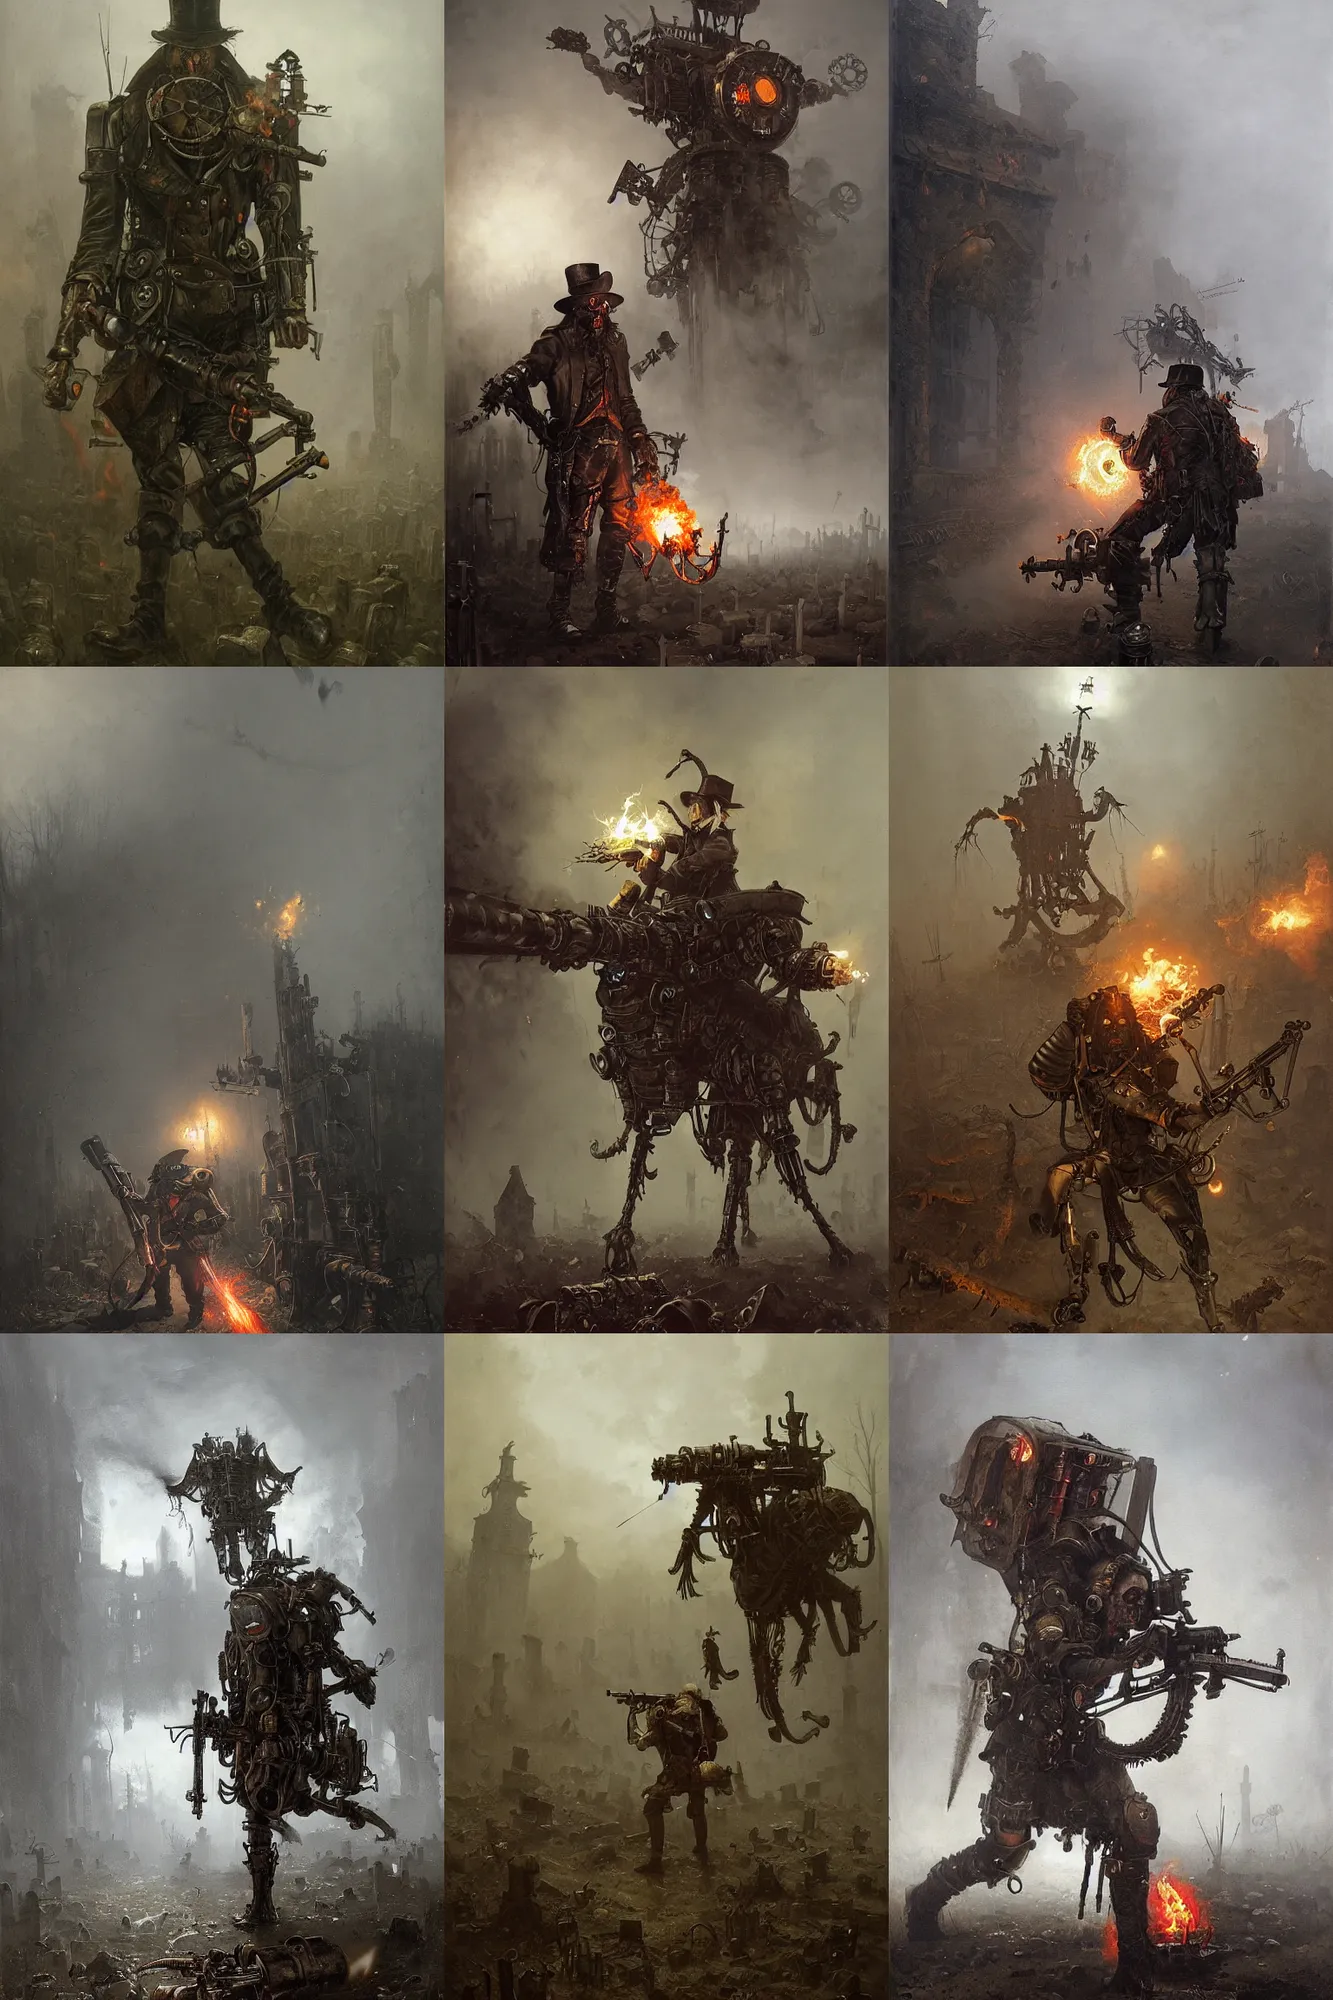 Prompt: Abraham Van Helsing equipped in a heavy steampunk exoskeleton with a machine gun and a backpack flame-thrower fights against vampires and ghouls at an old foggy graveyard by Jakub Różalski, highly detailed